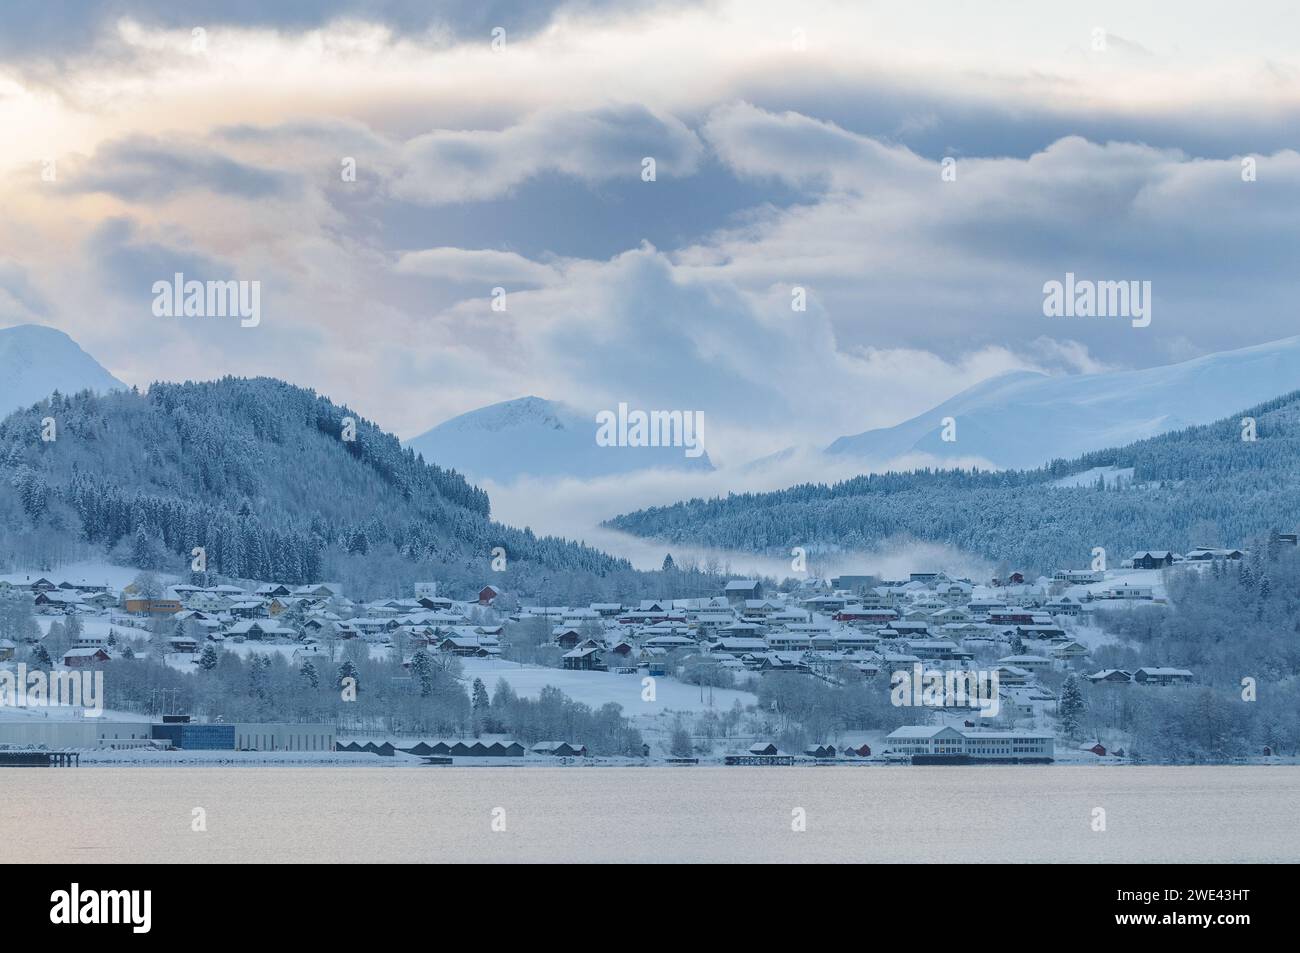 A serene snowy landscape showcases a quiet village beside the sea, enveloped by gentle mist and surrounded by forested mountains at dawn. Stock Photo